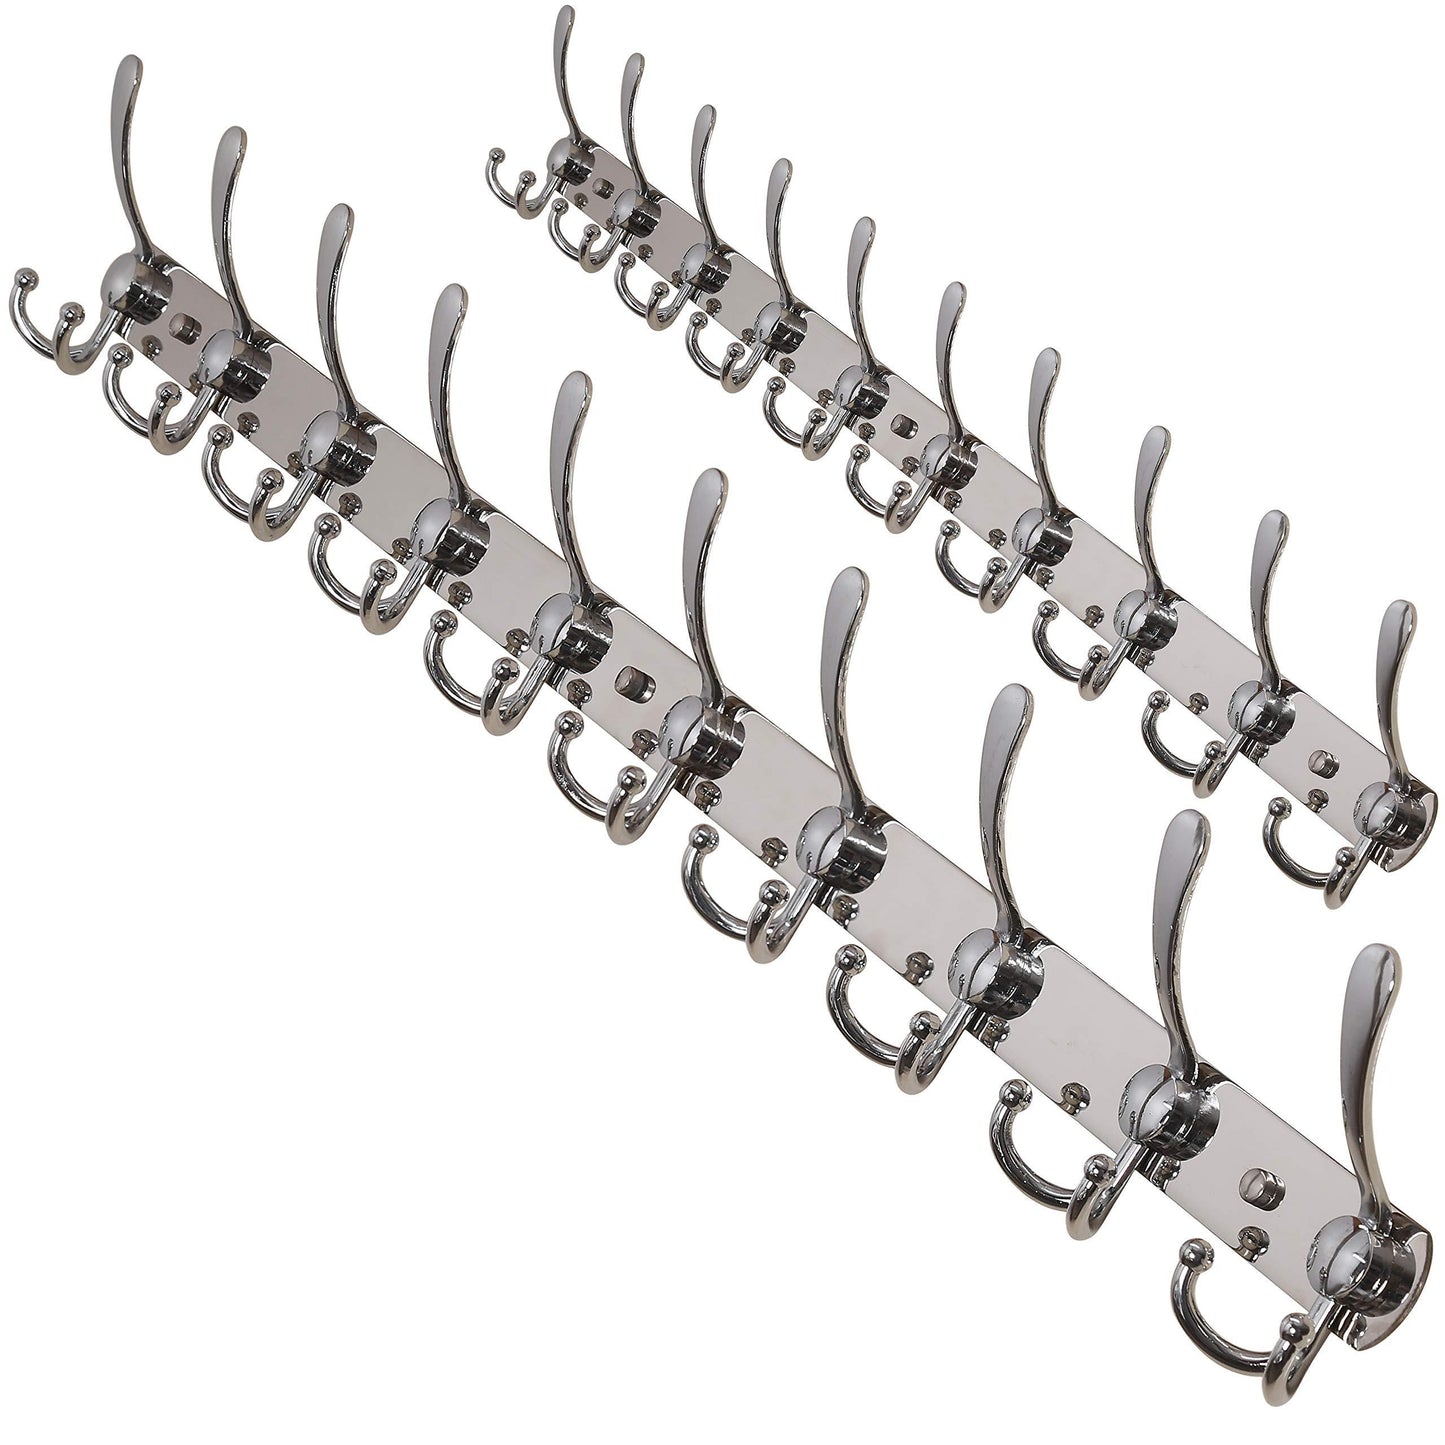 Dseap Wall Mounted Coat Rack - 10 Tri Hooks, 37-5/8” Long, 16” Hole to Hole - Heavy Duty Stainless Steel Coat Hook for Coat Hat Towel Robes Mudroom Bathroom Entryway (Chromed, 2 Packs)